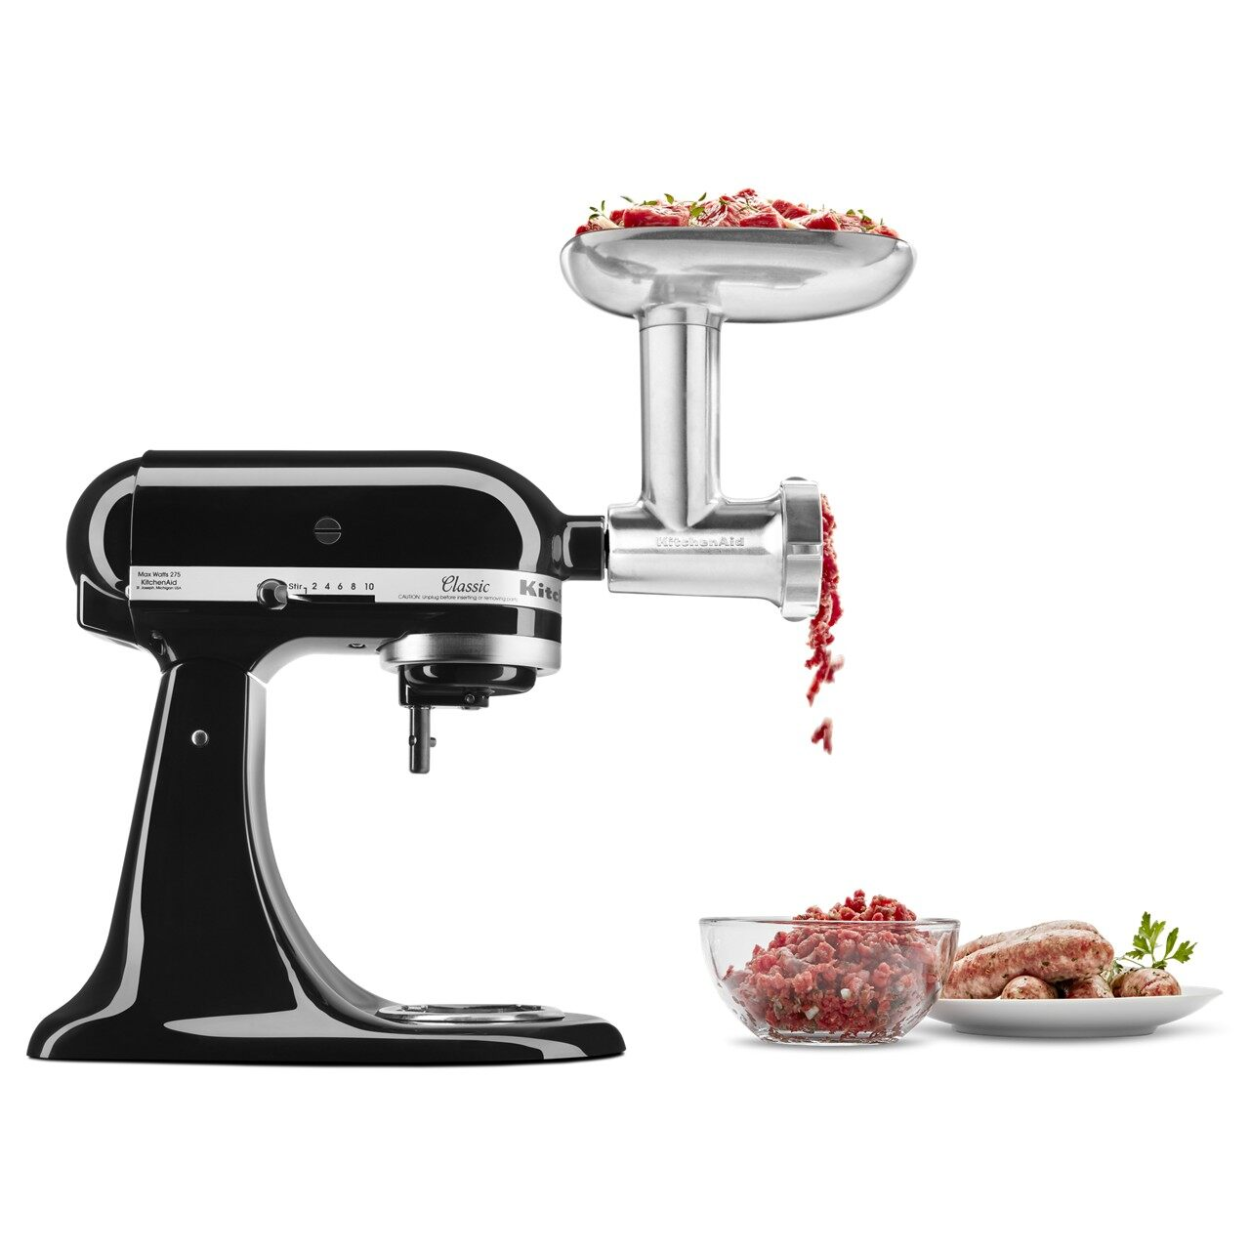 Meat Grinder Attachment for Kitchenaid Mixer, Metal Food Grinder Attachment  Durable Meat Food Processor Attachment for KitchenAid Stand Mixers Includes  Sausage Filler Tubers - by Viemira 